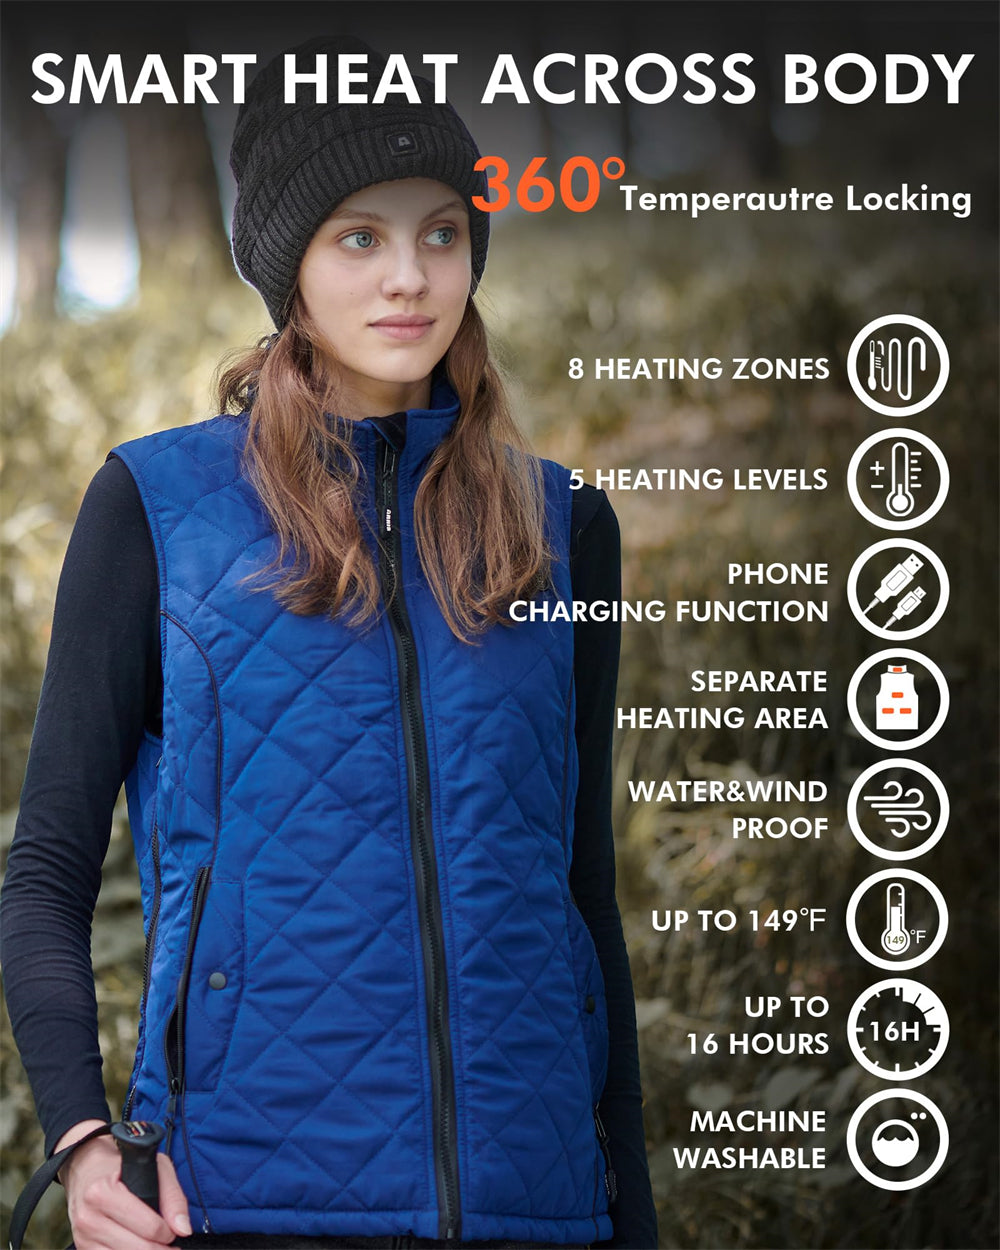 ARRIS Heated Vest for Women, Size Adjustable 7.4V Electric Warm Vest 8 Heating Panels with Battery Pack